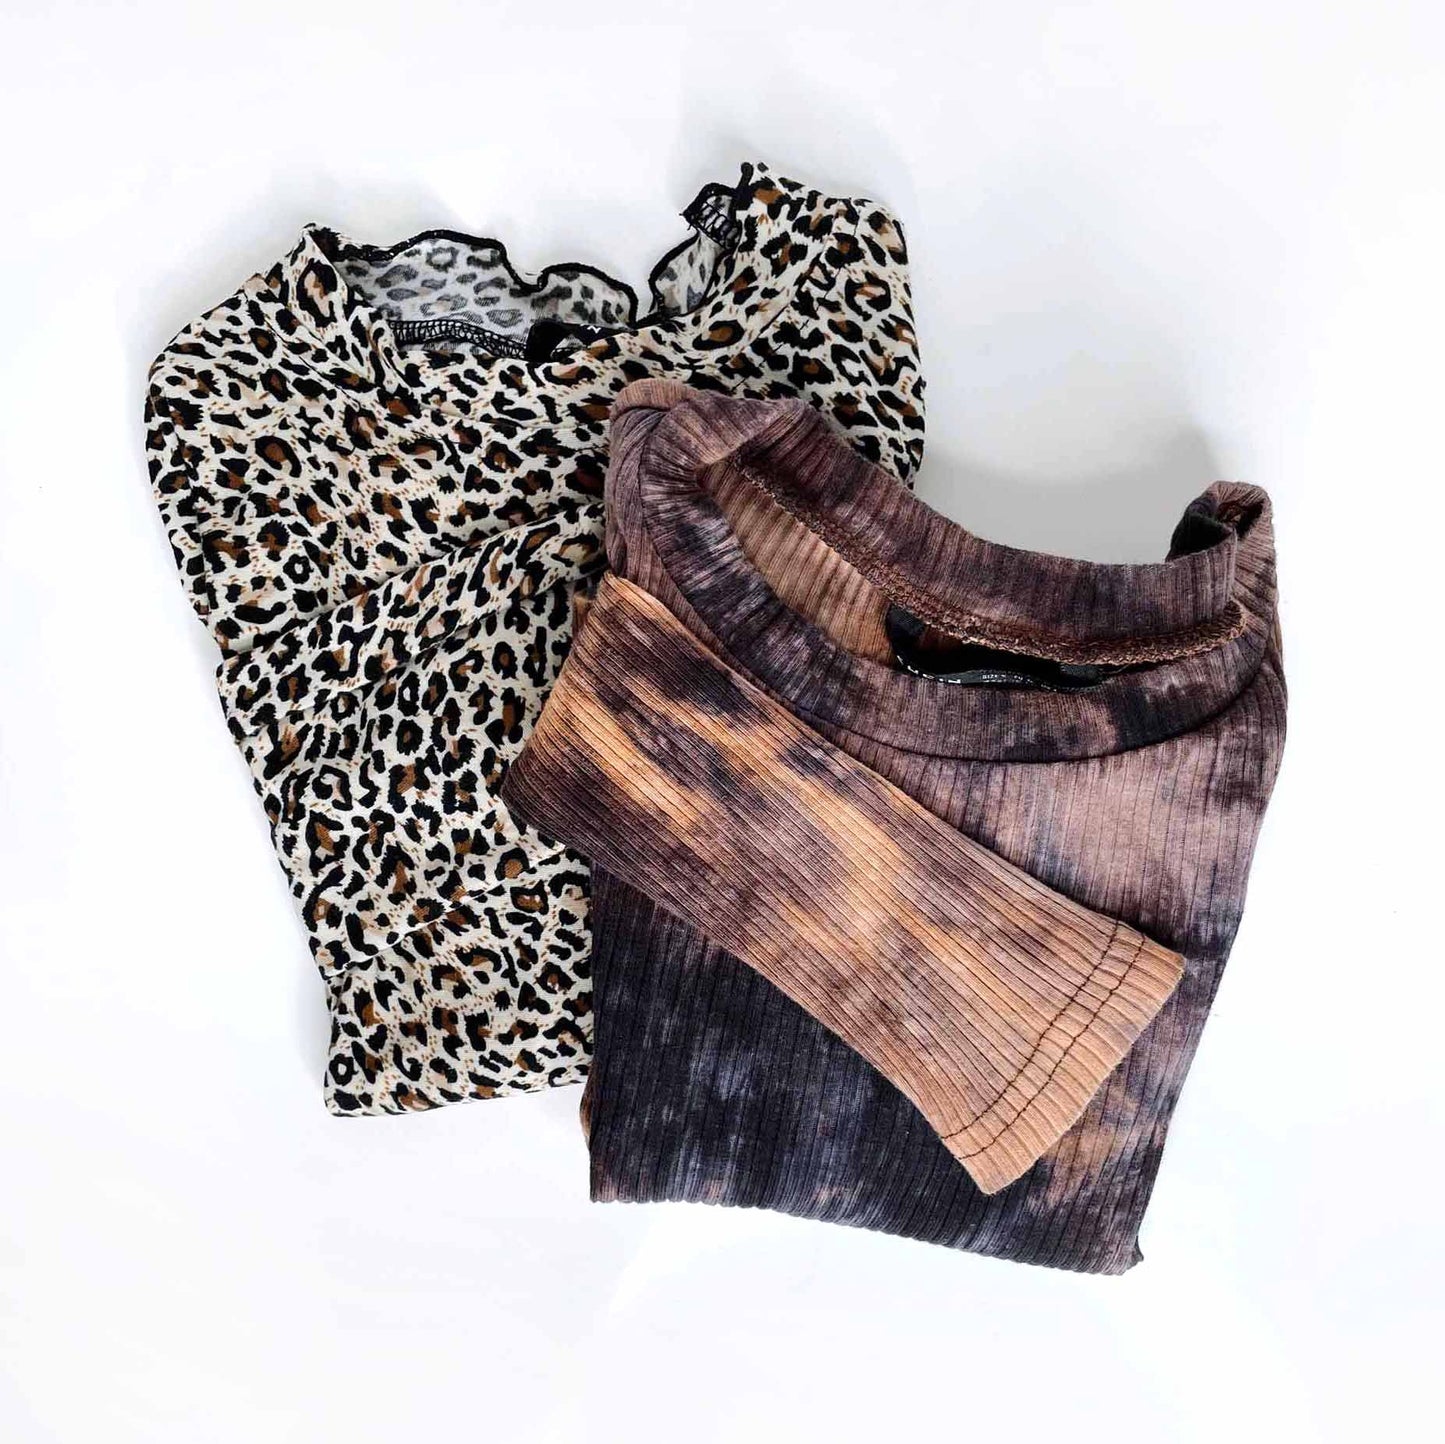 shein long sleeve crop top - animal print or tie dye - size small